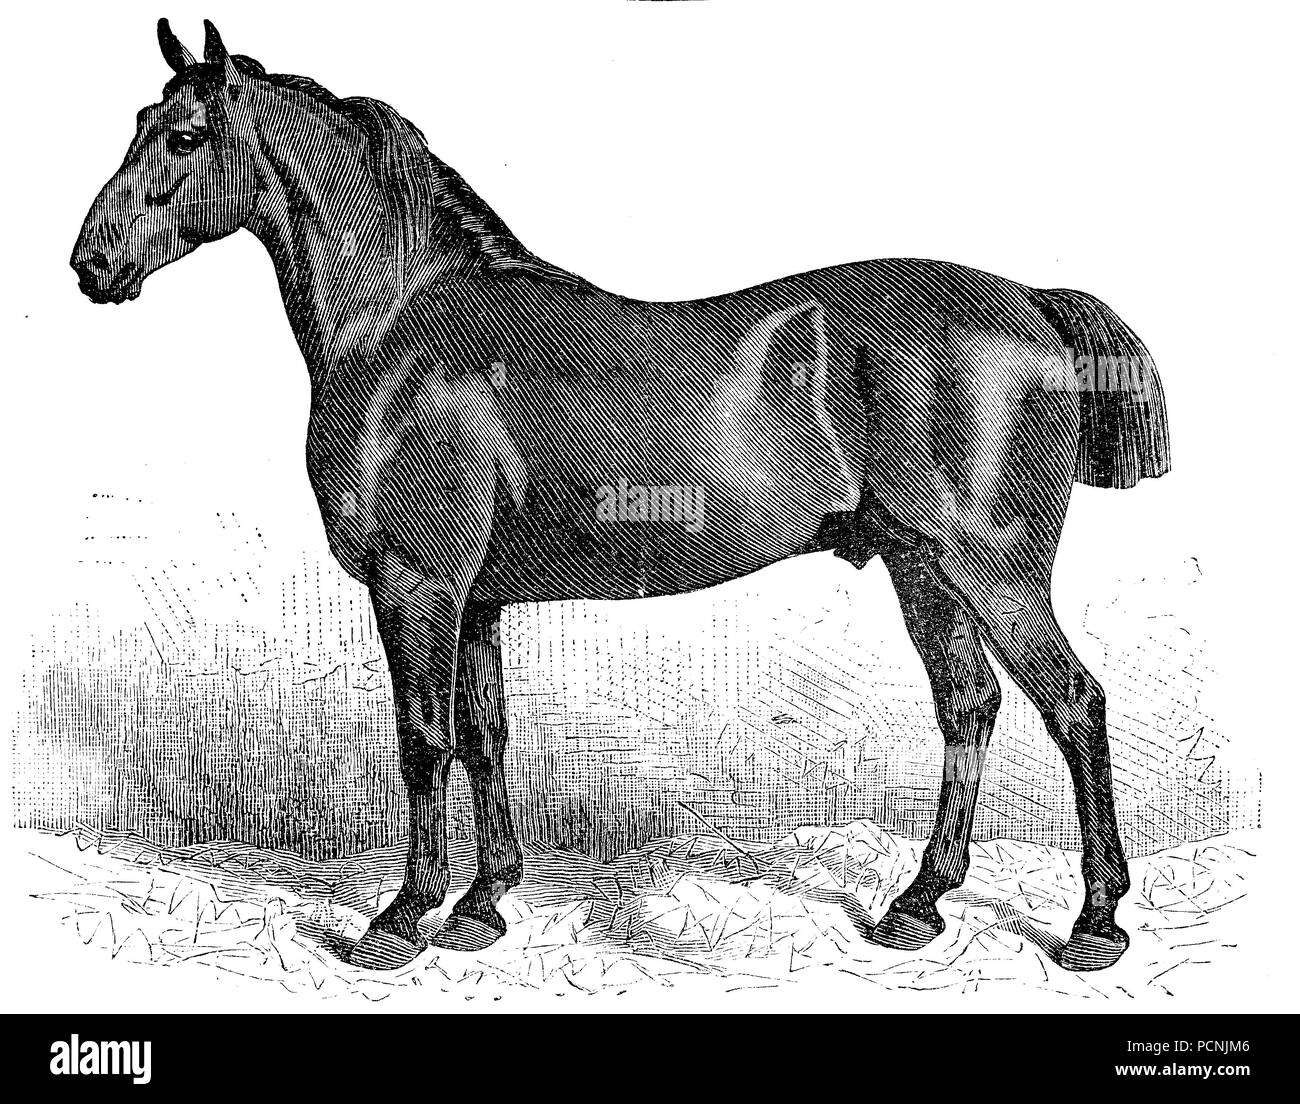 Horse breed, Anglonorman, digital improved reproduction of an historical image from the year 1885 Stock Photo